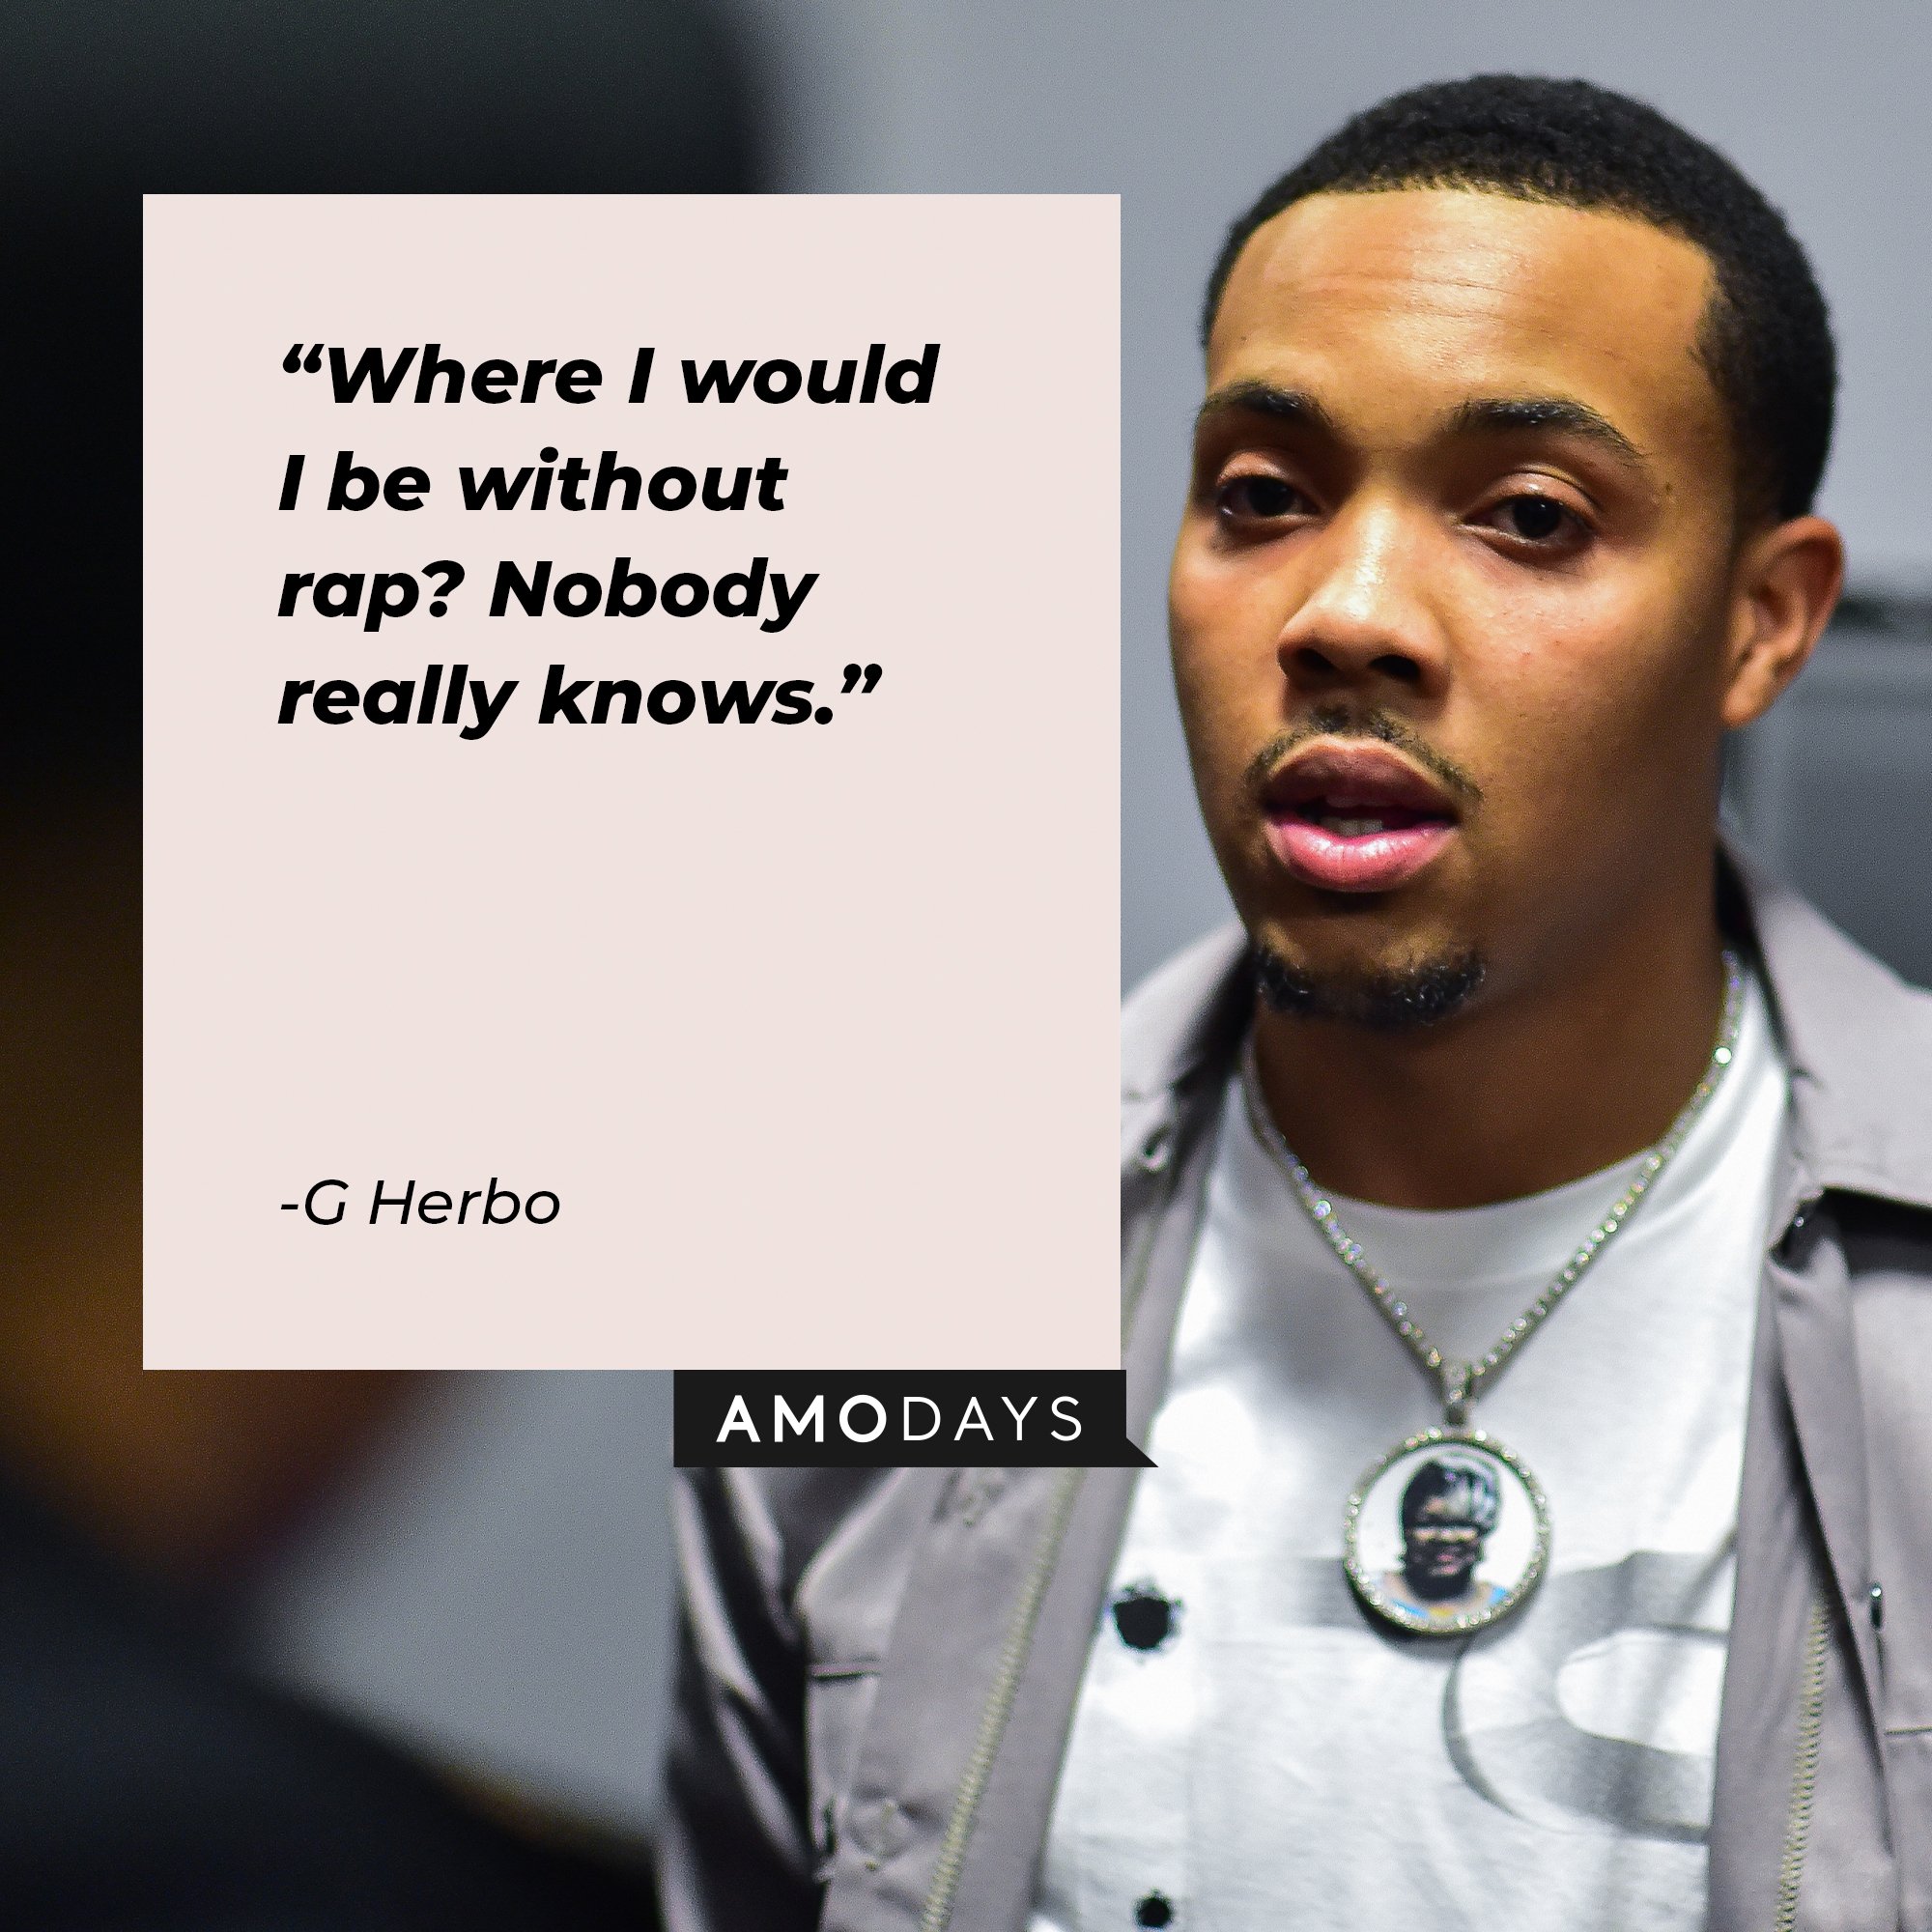 G Herbo’s quote: "Where I would I be without rap? Nobody really knows." | Image: AmoDays 